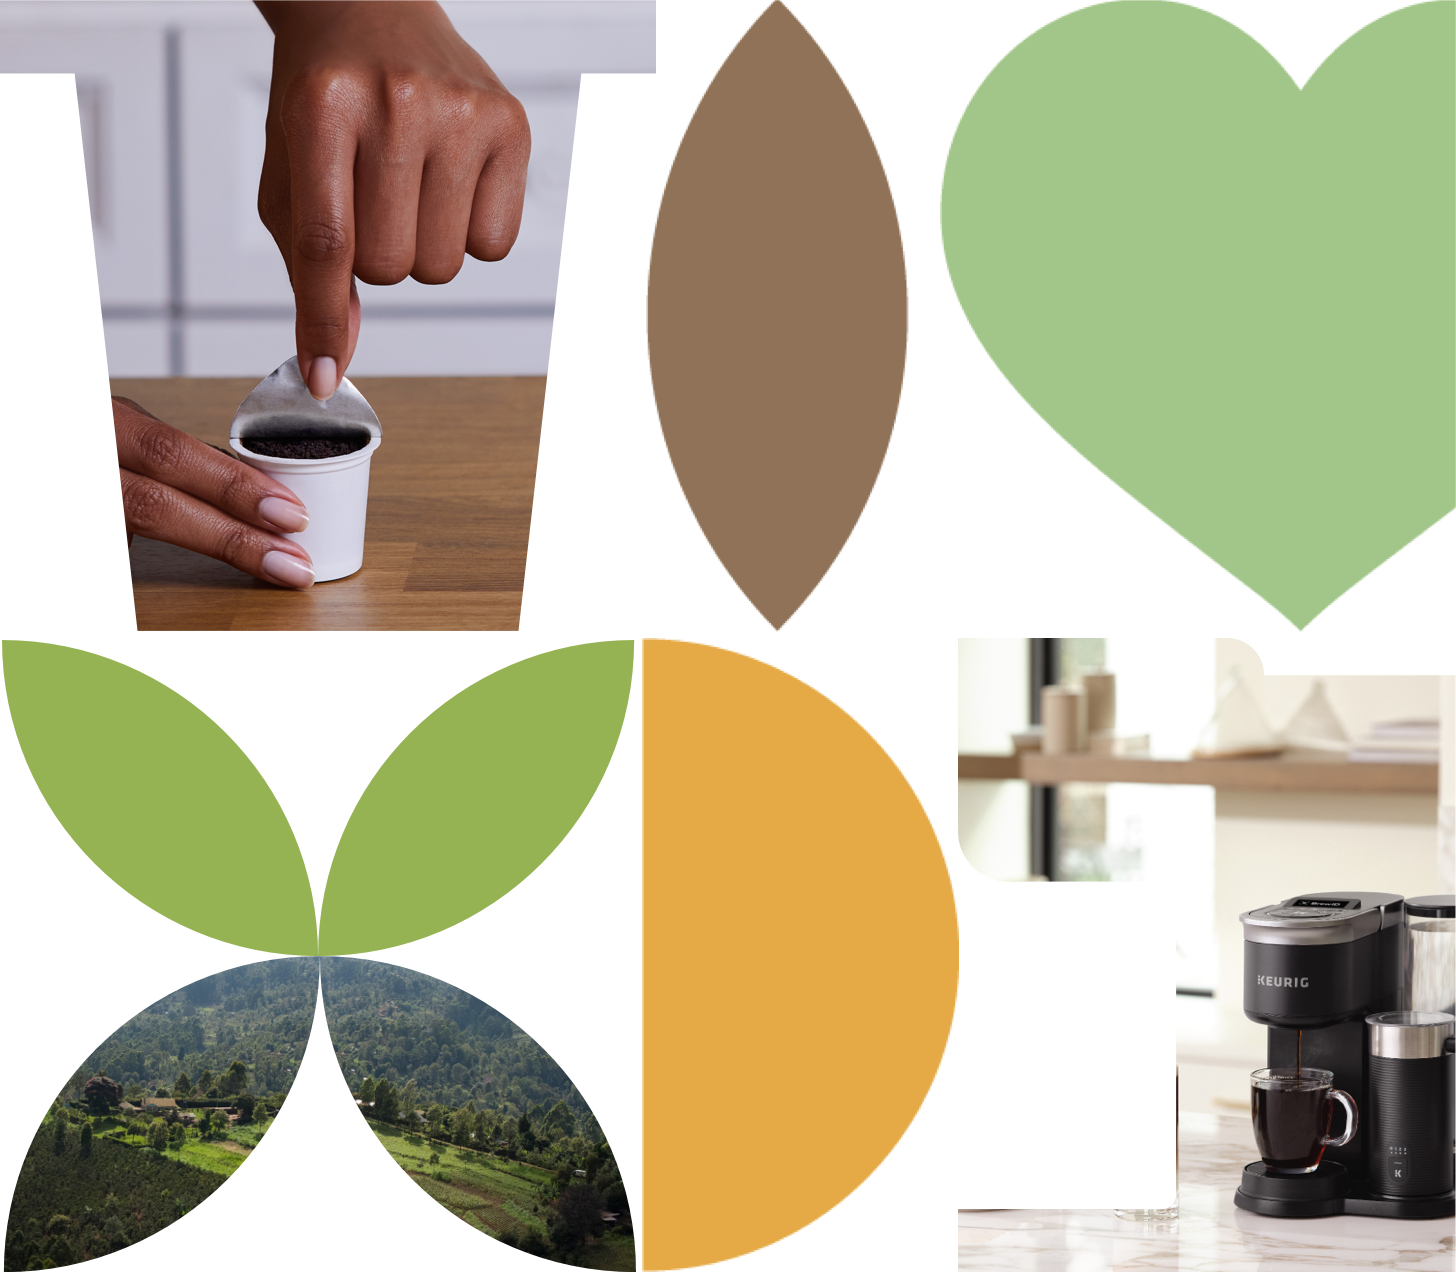 Collage containing images of a K-Cup pod, a Keurig brewer, and a coffee farmPeelable Lid K-Cup pod being peeled and Woman smiling with Keurig coffe maker